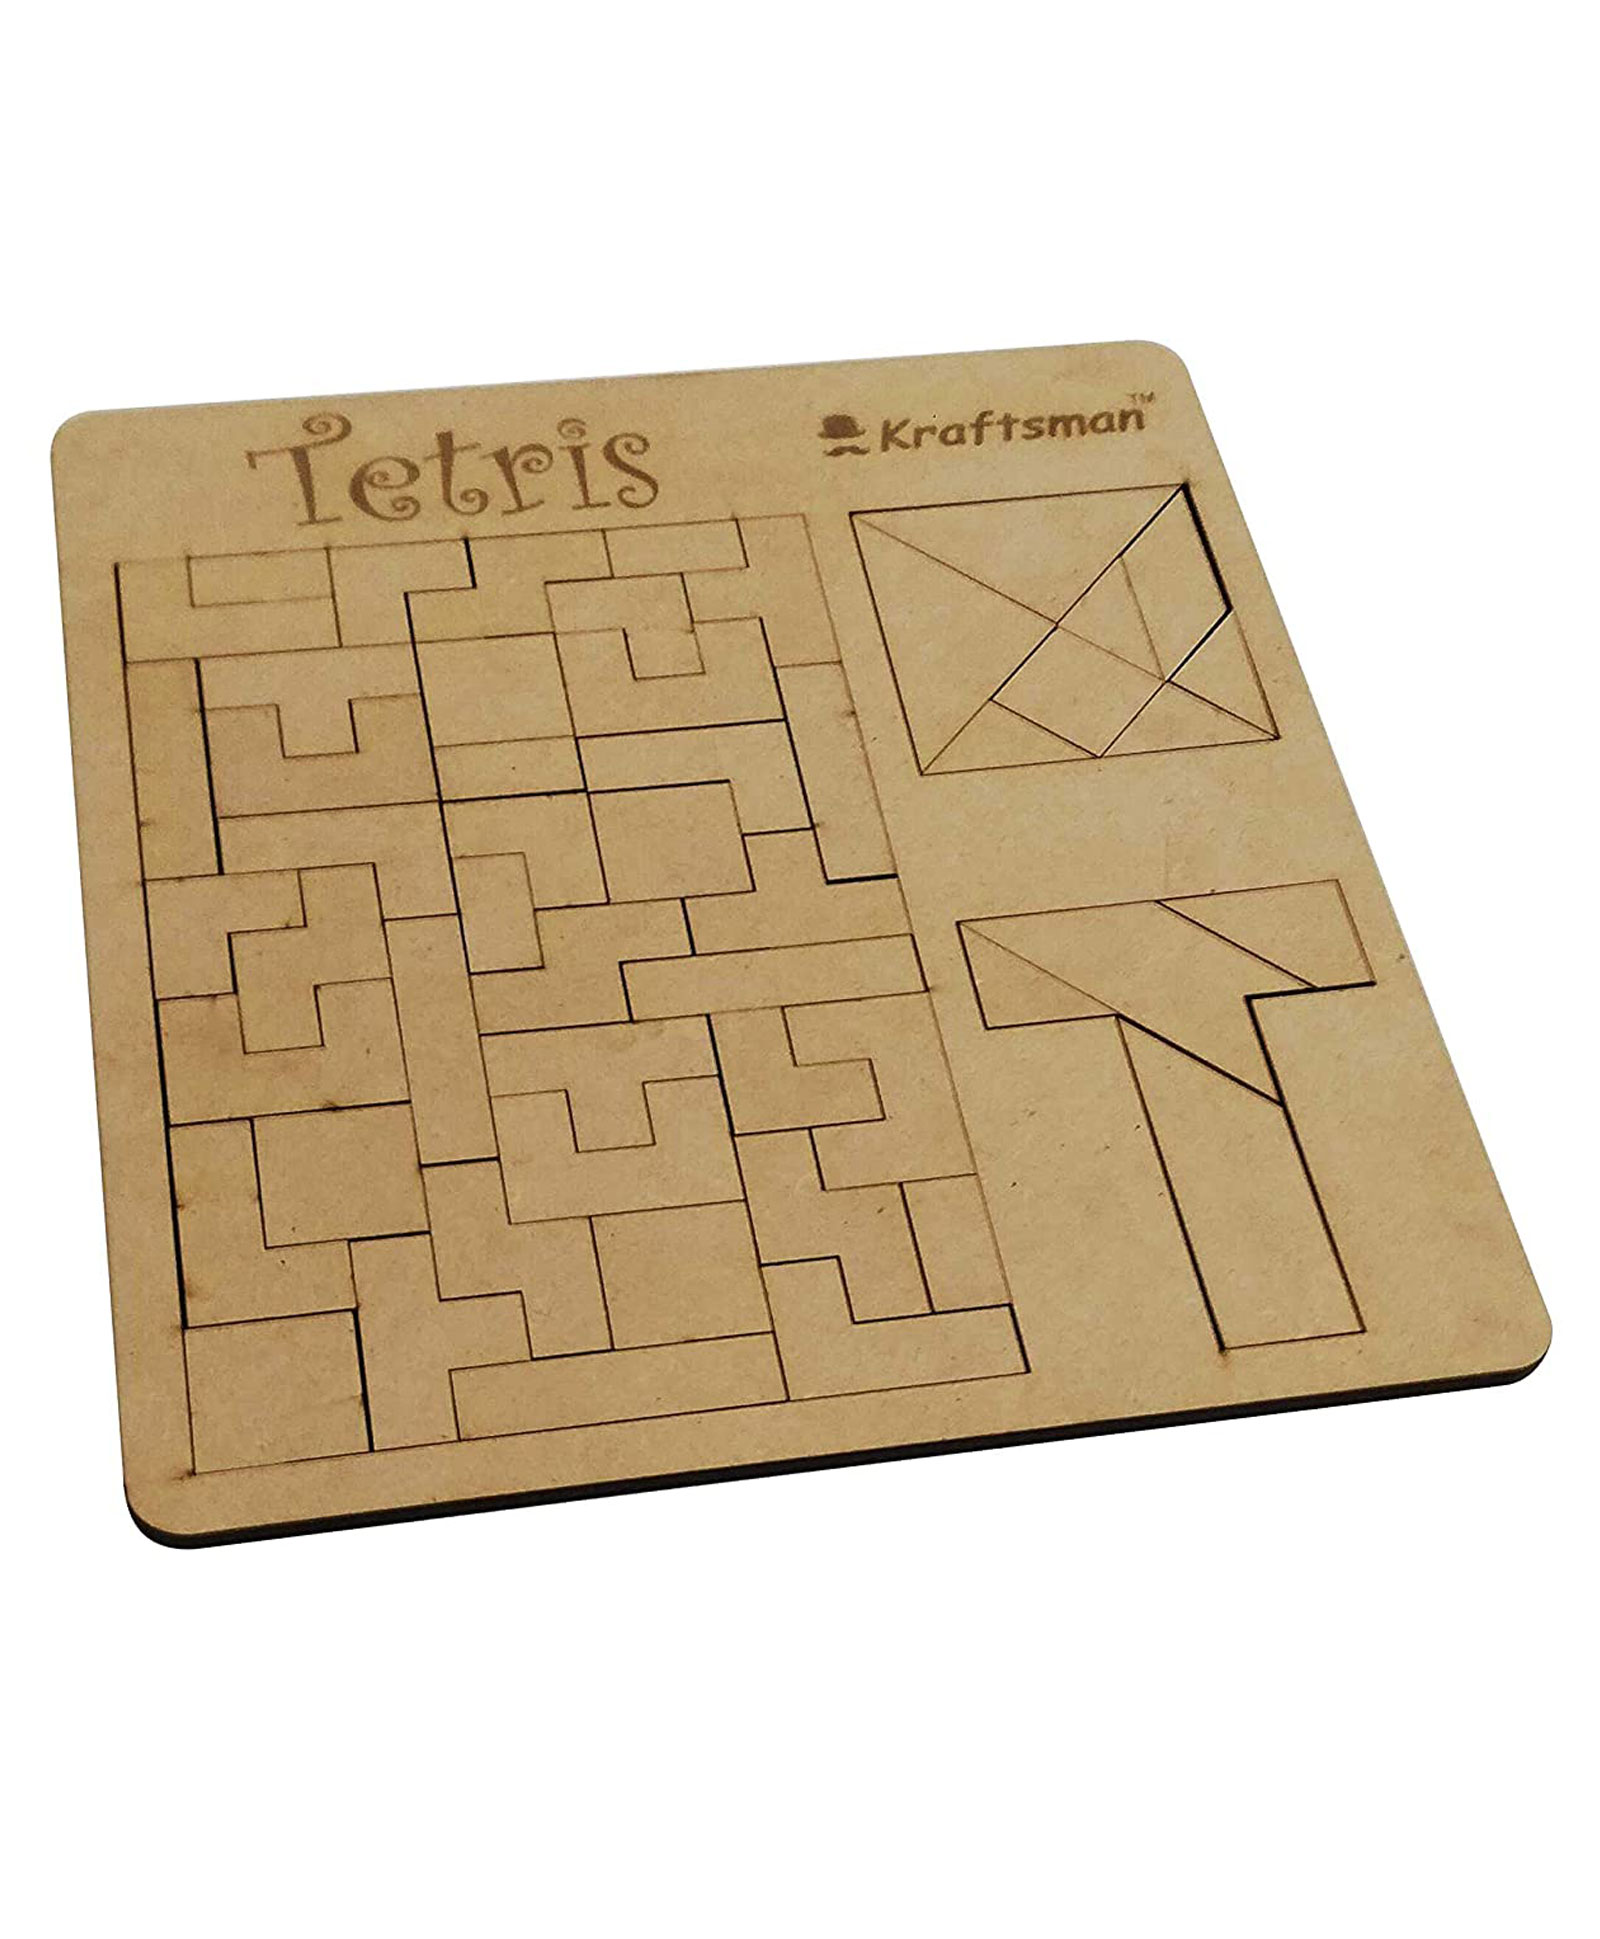 Kraftsman Wooden Tetris Block Puzzle Board Made in India Tetris Tangram T  Puzzle - Brown Online India, Buy Puzzle Games & Toys for (6-15 Years) at   - 11394048